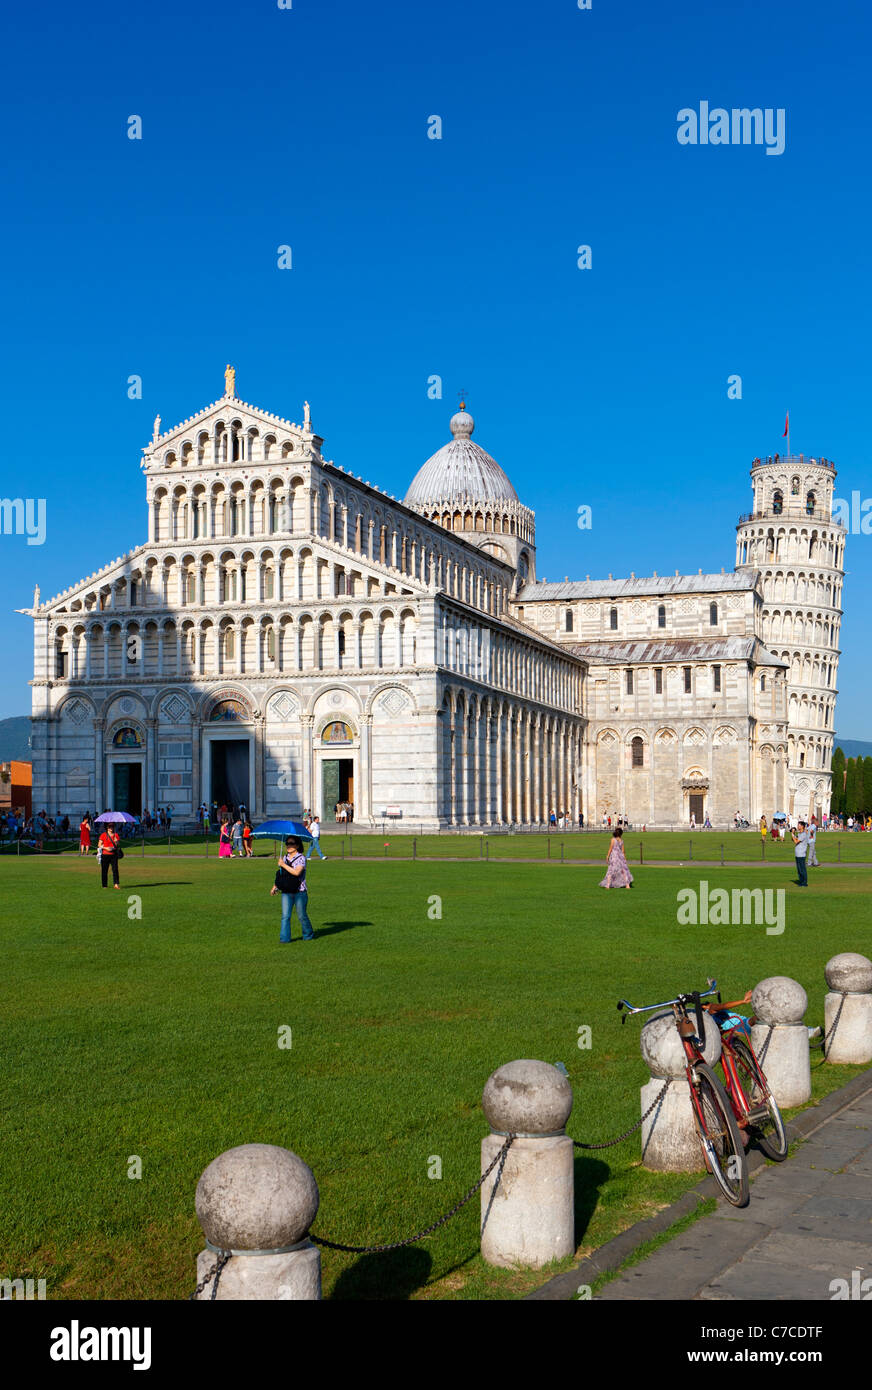 Cathedral and The Leaning Tower of Pisa (Torre pendente di Pisa), Pisa, Toscana, Italy, Europe Stock Photo